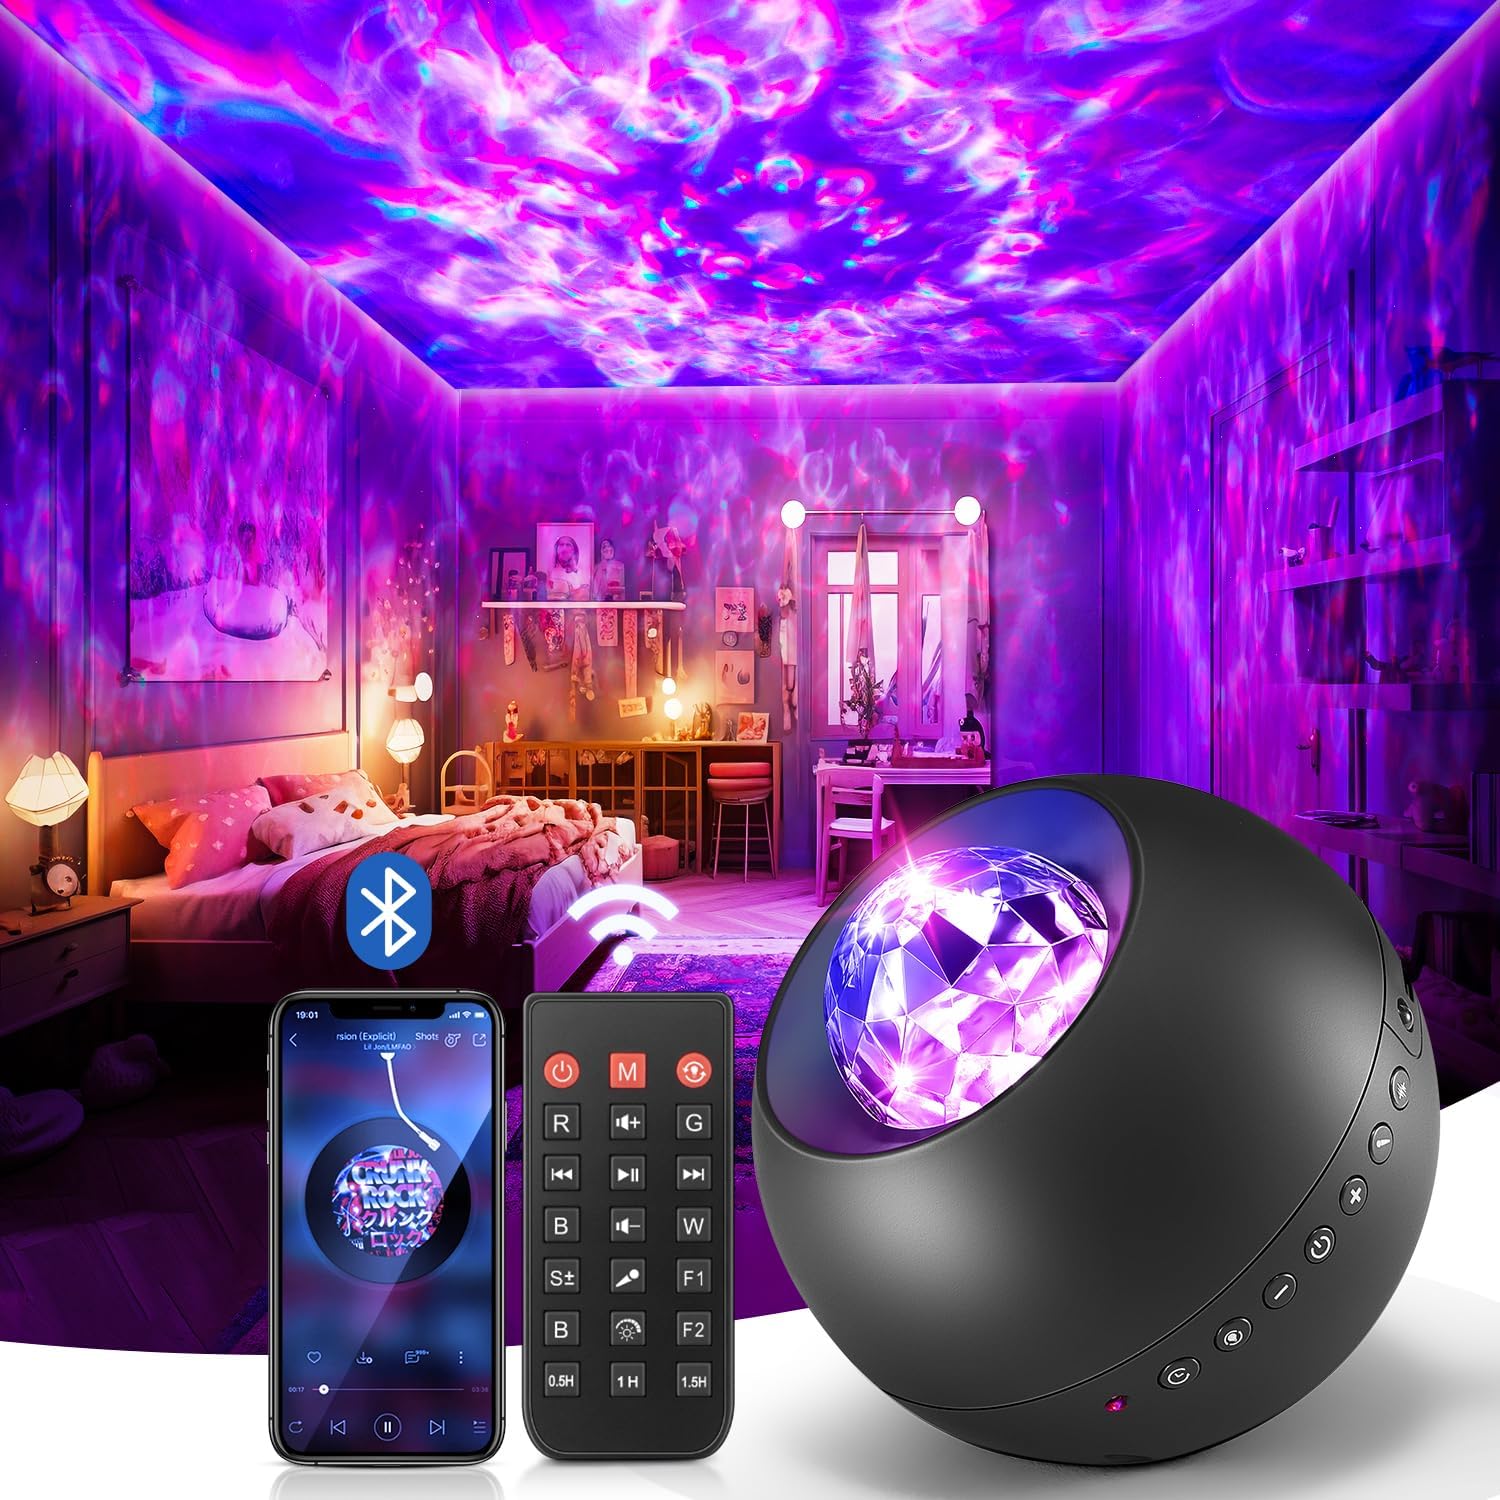 Galaxy Projector 20 Lighting Modes Star Projector, HiFi Bluetooth Speaker Galaxy Projector Light, 6 White Noise Sensory Lights, Remote & Timer Galaxy Light Projector for Bedroom Gifts for Room Decor [Energy Class A] 2